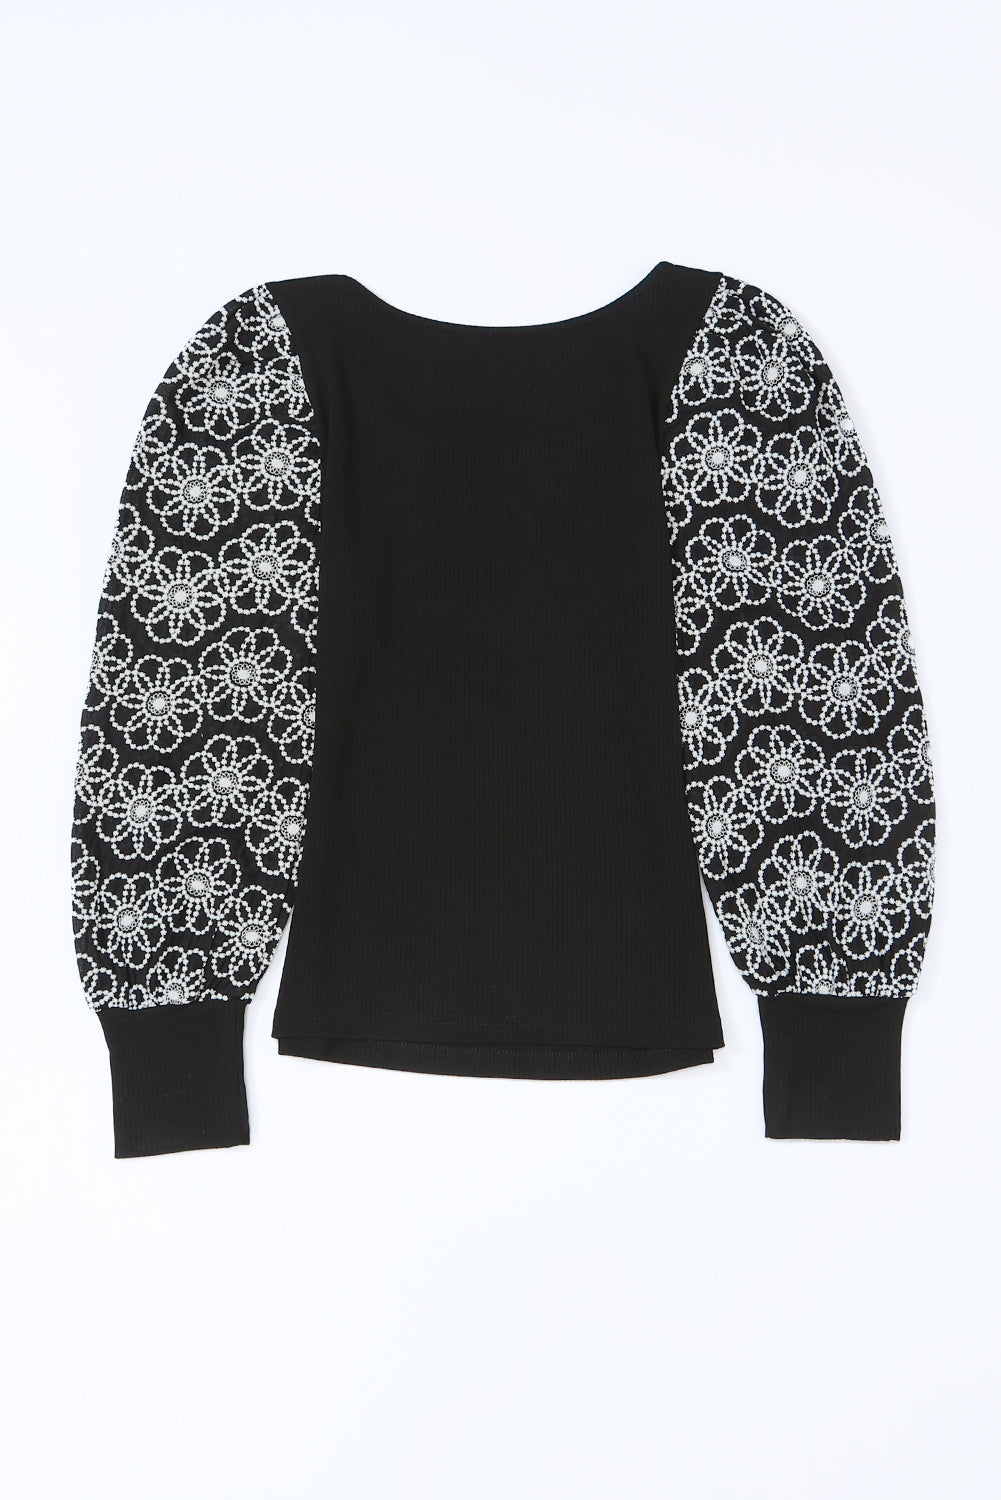 Black Flower Puff Sleeve Ribbed Knit Top